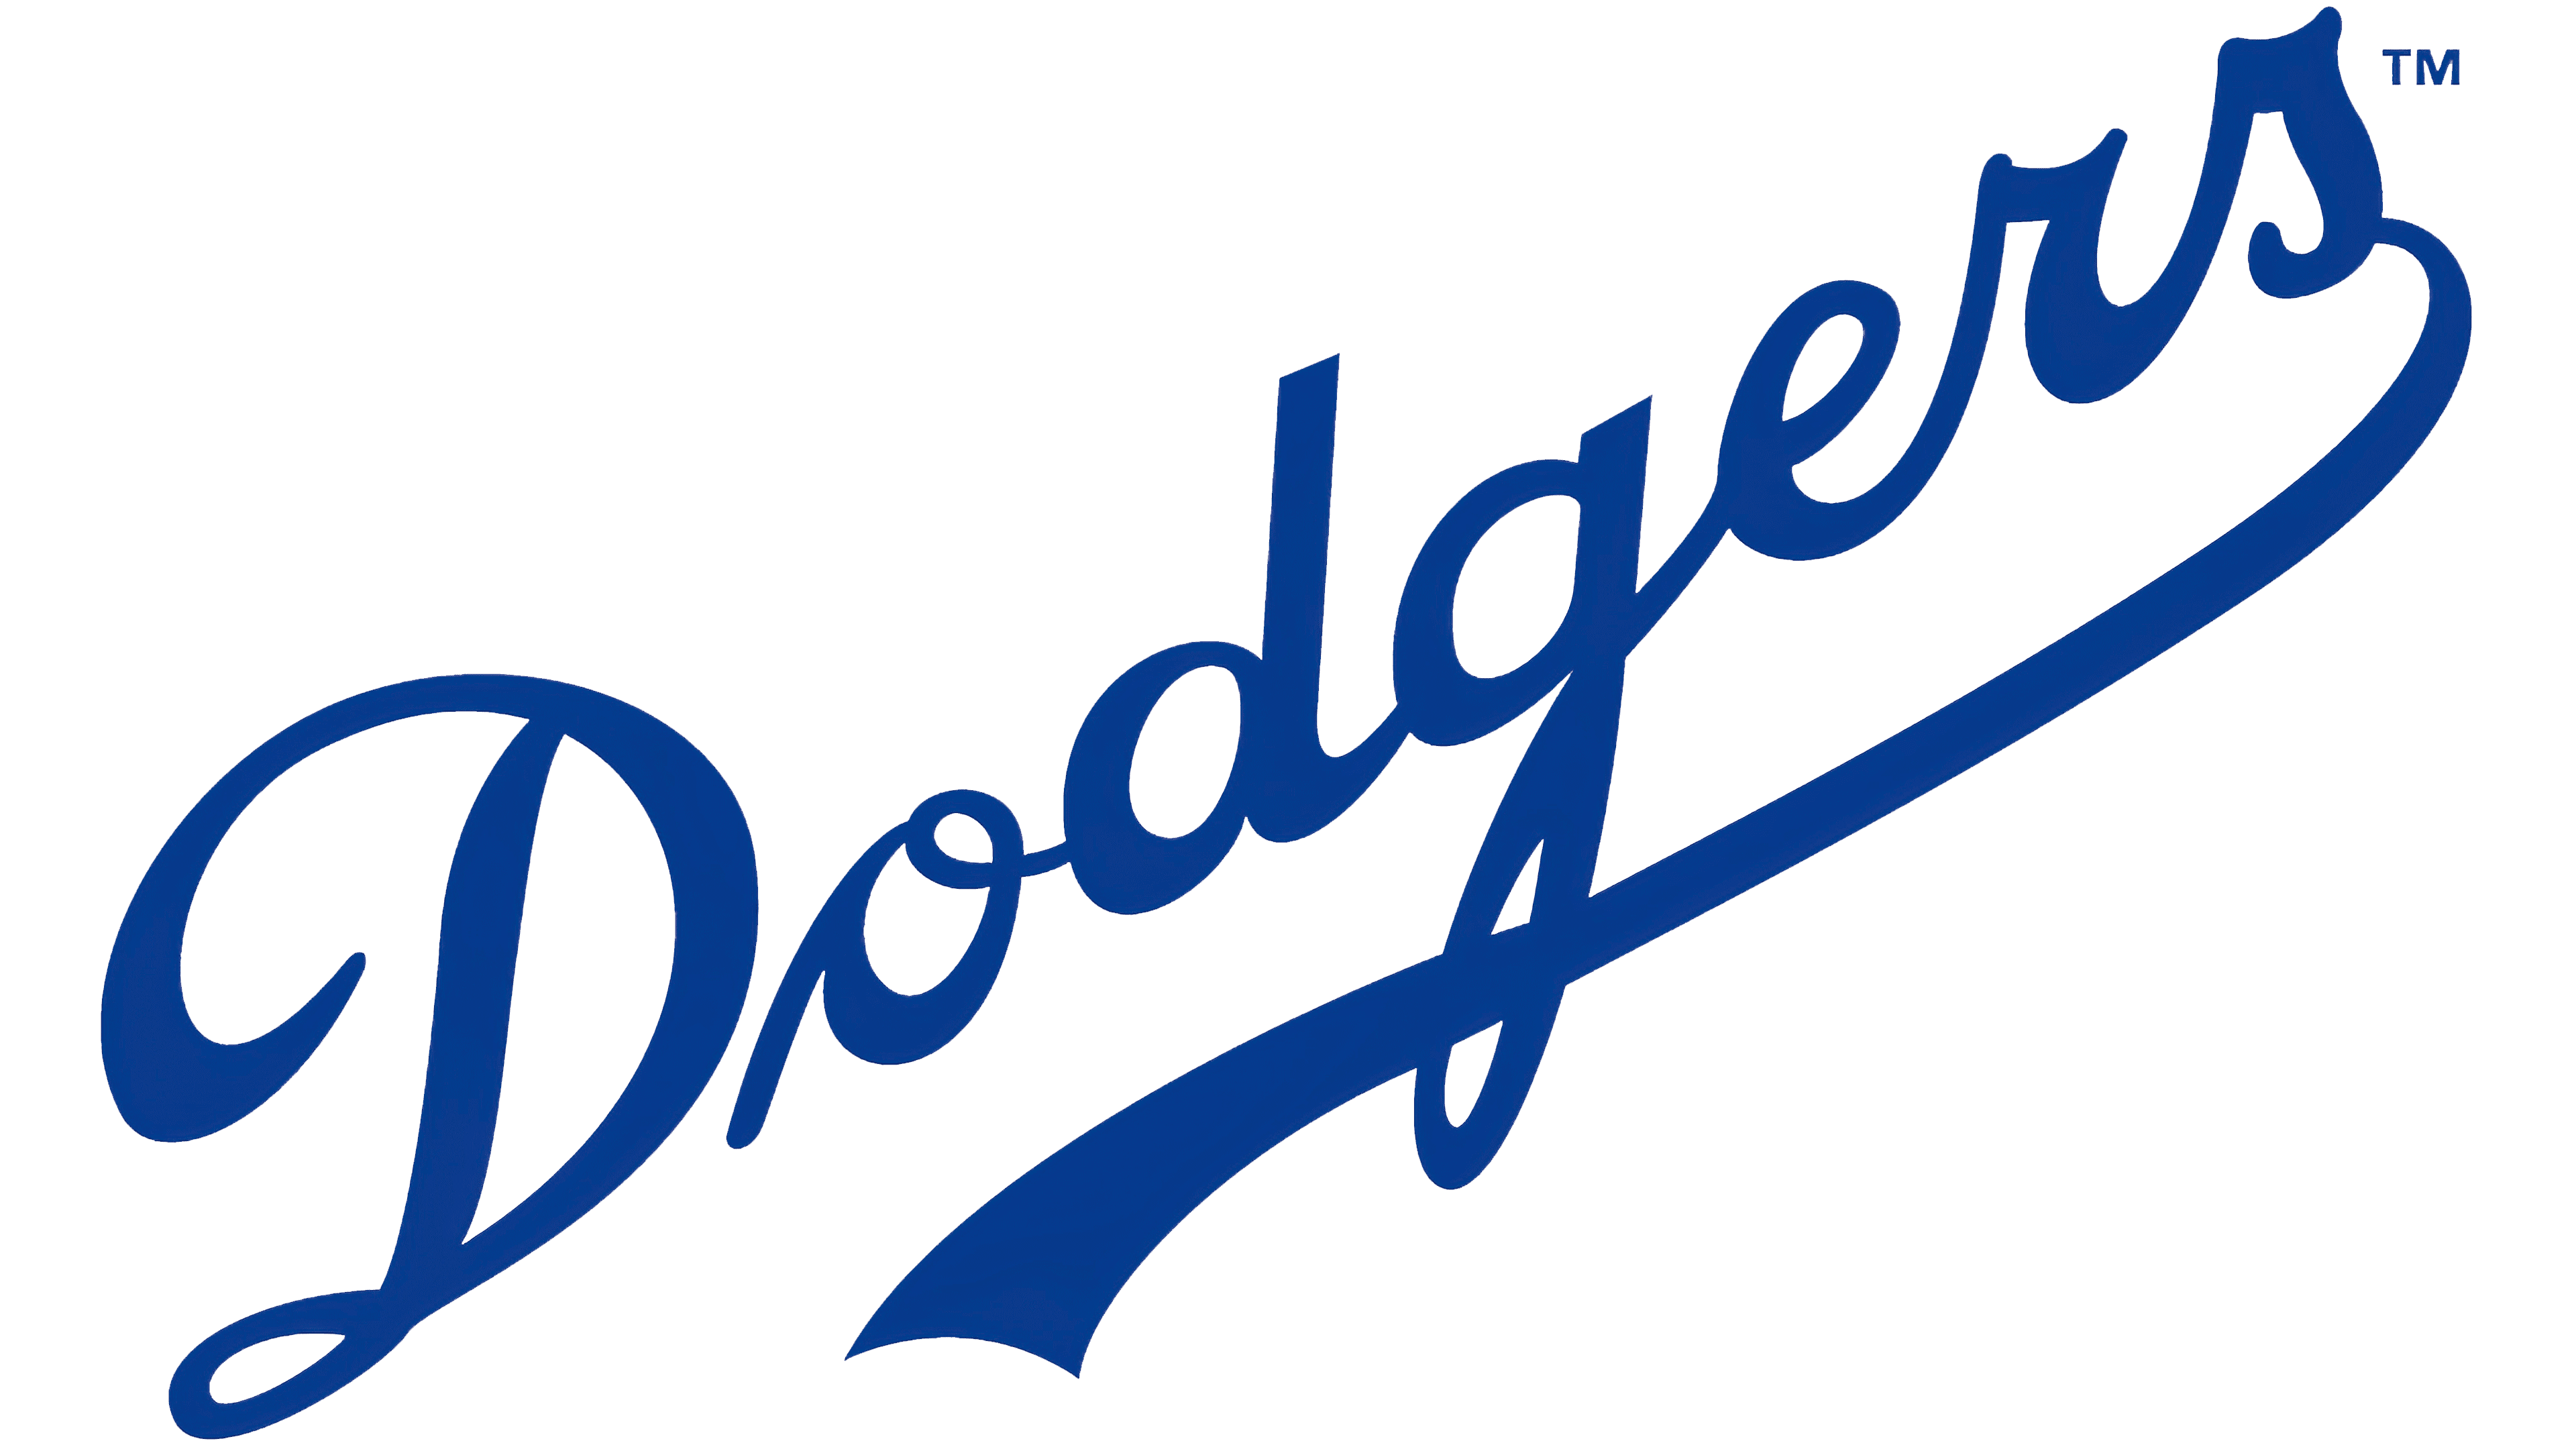 los angeles dodgers logo history the most famous brands and company logos in the world los angeles dodgers logo history the